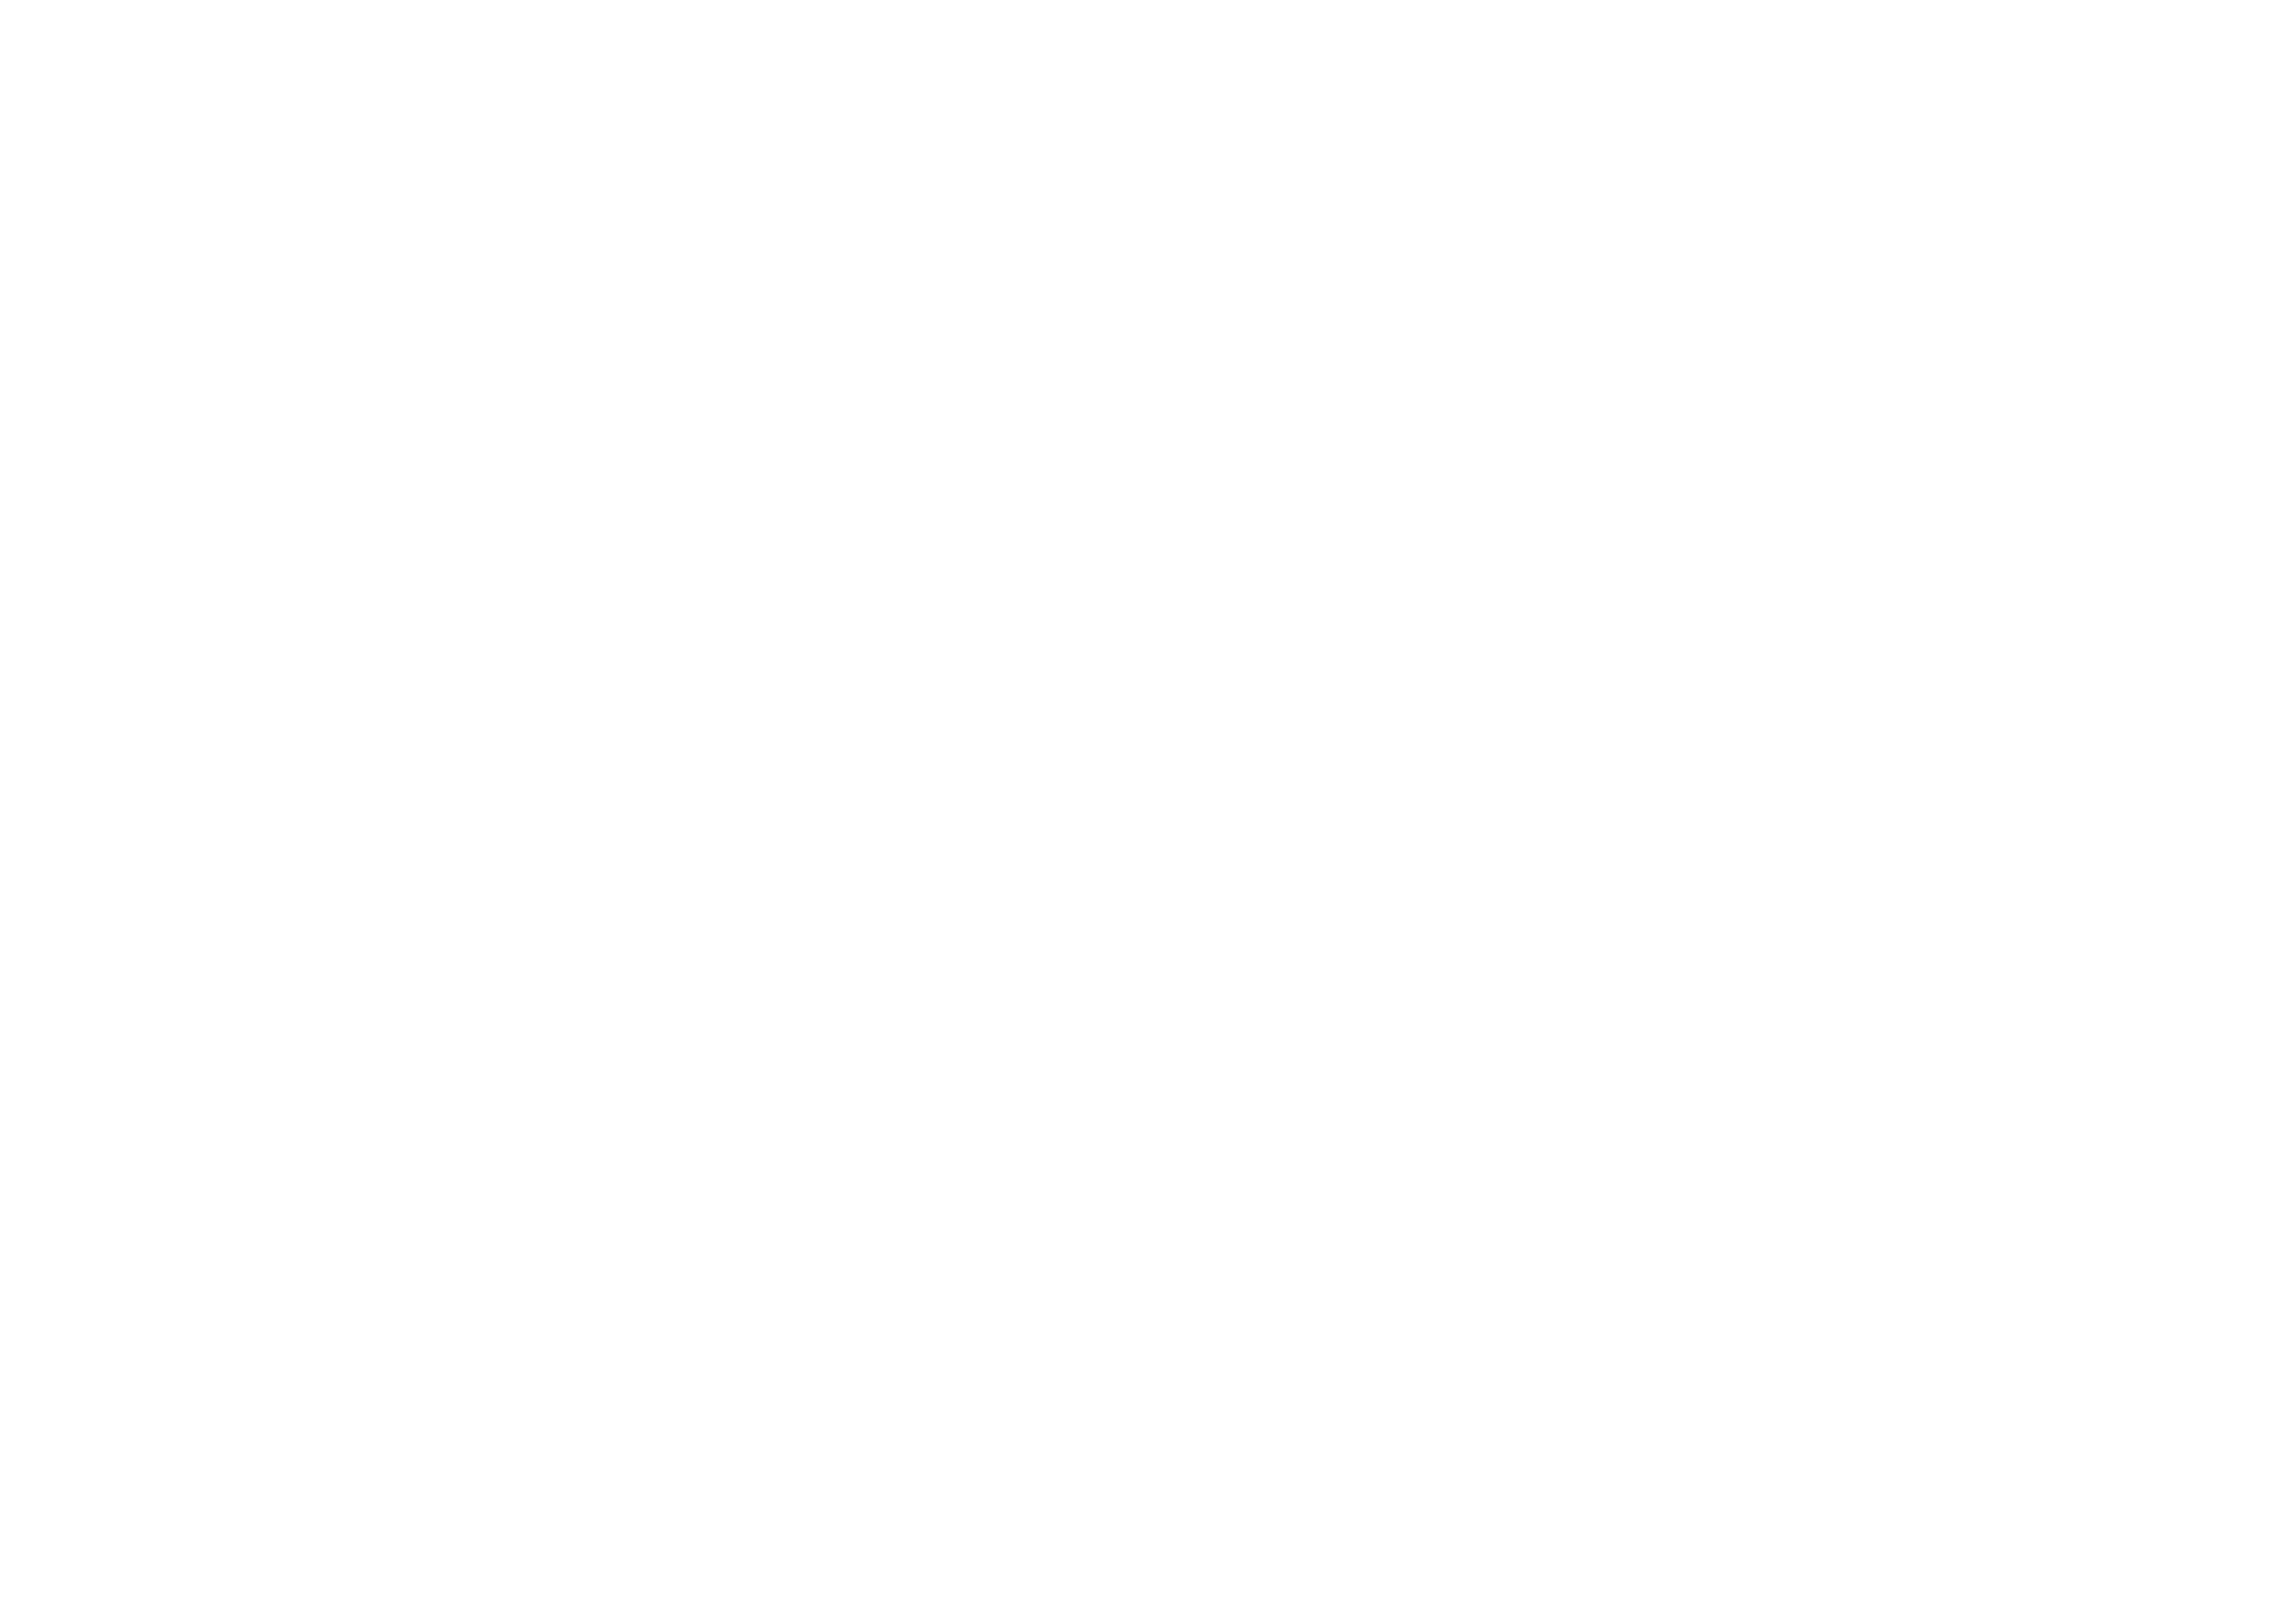 L'Admiralty table logo